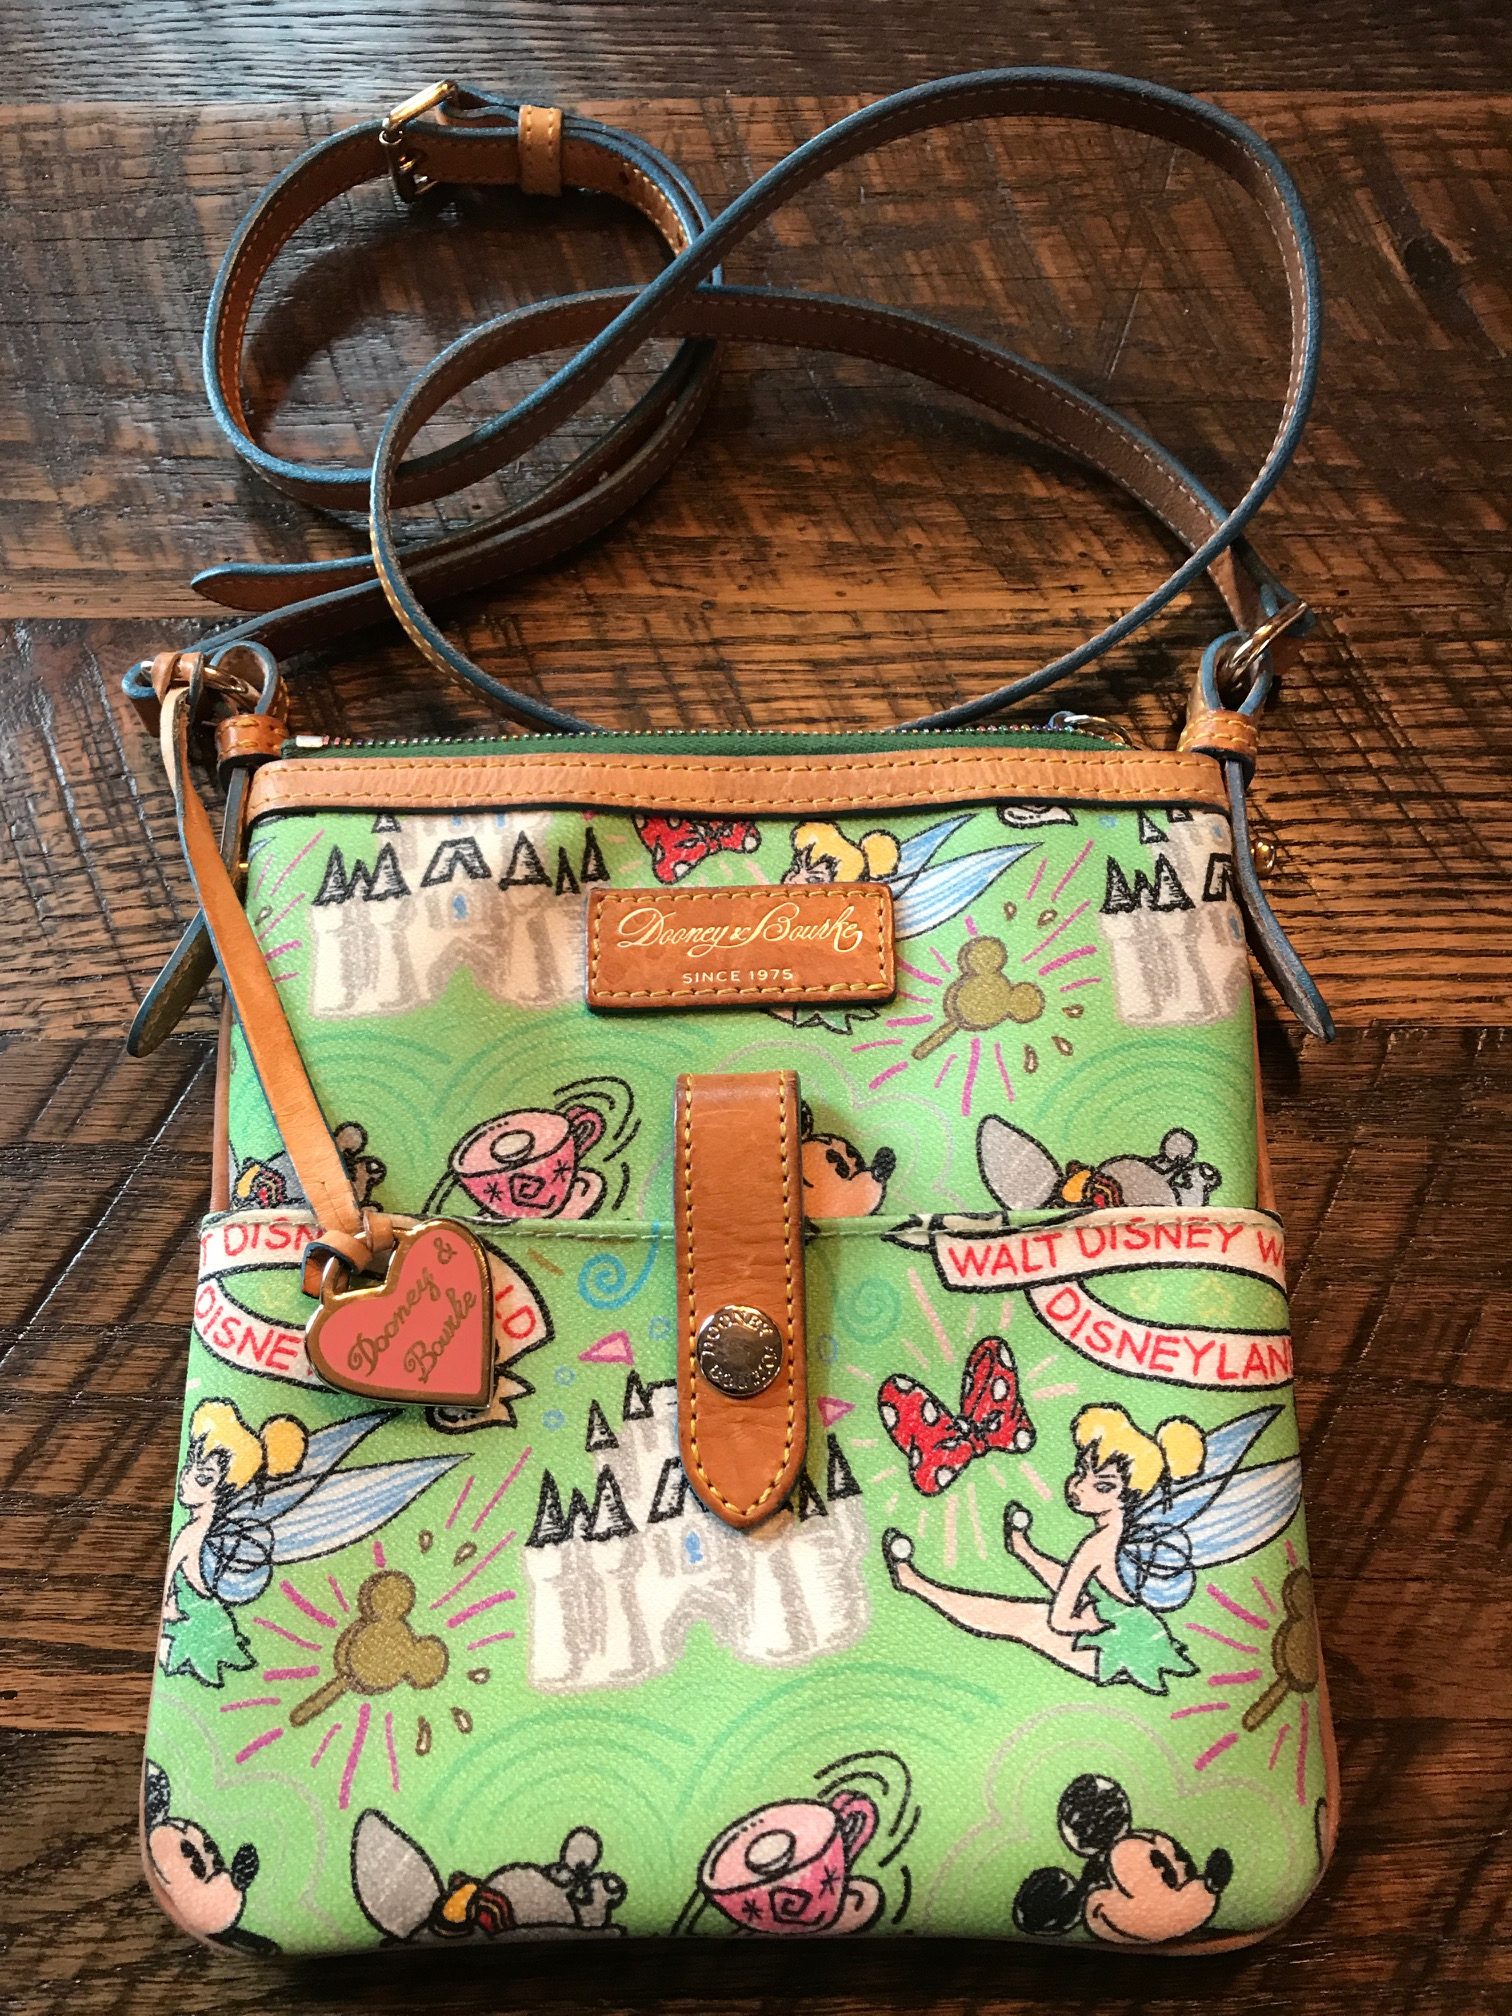 Best Bag to Carry at Disney World